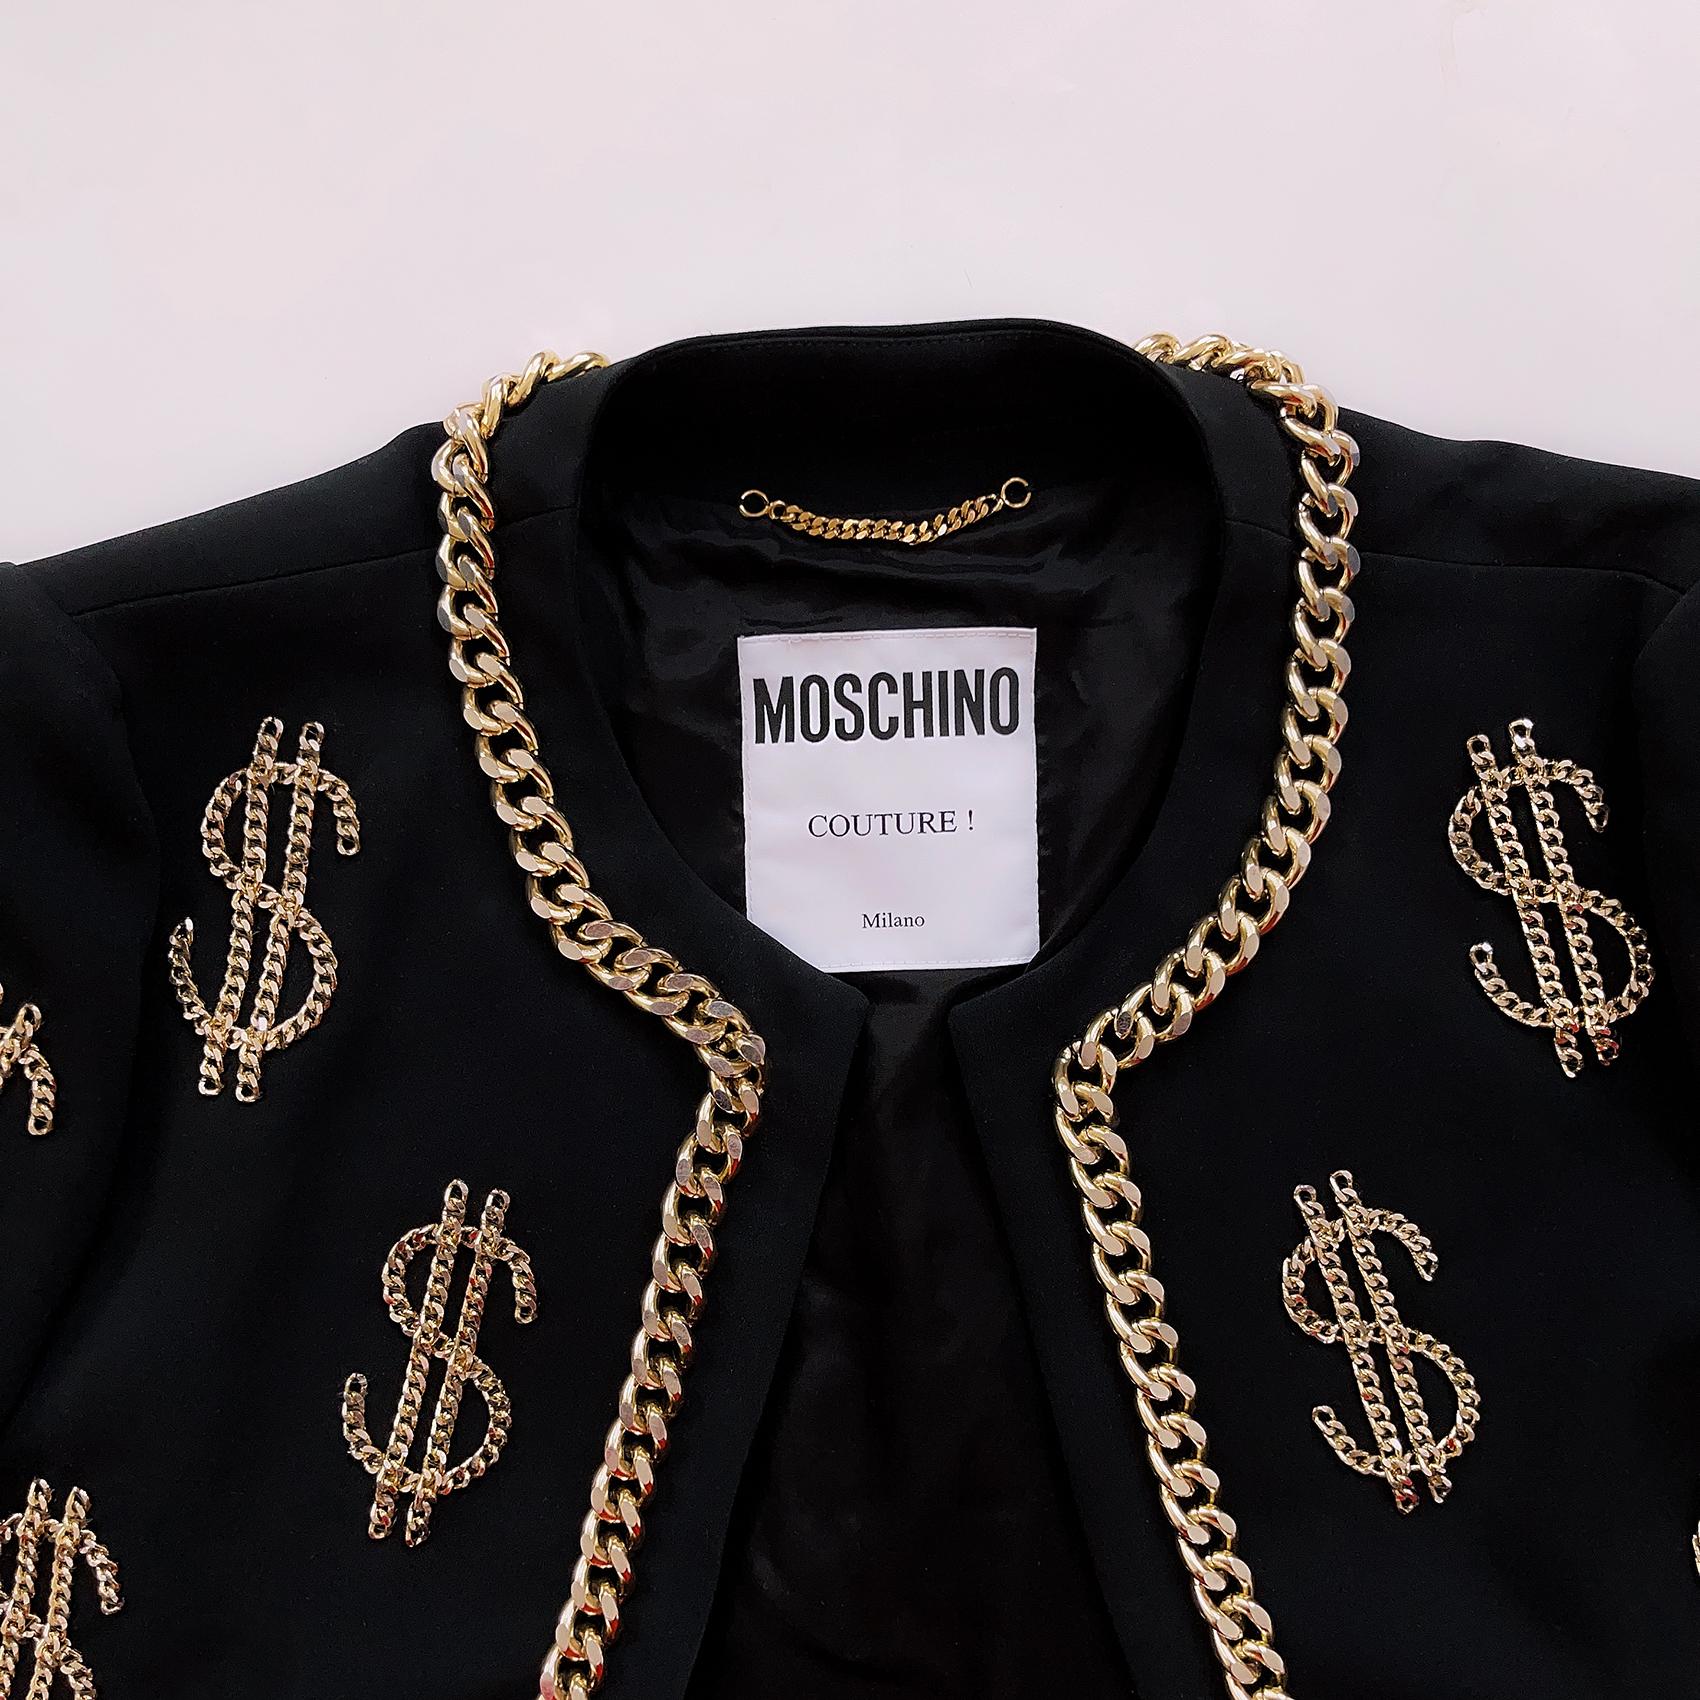 Iconique MOSCHINO Couture Dollar Sign Ensembe Black Dress Jacket Gold Chain Set  en vente 2